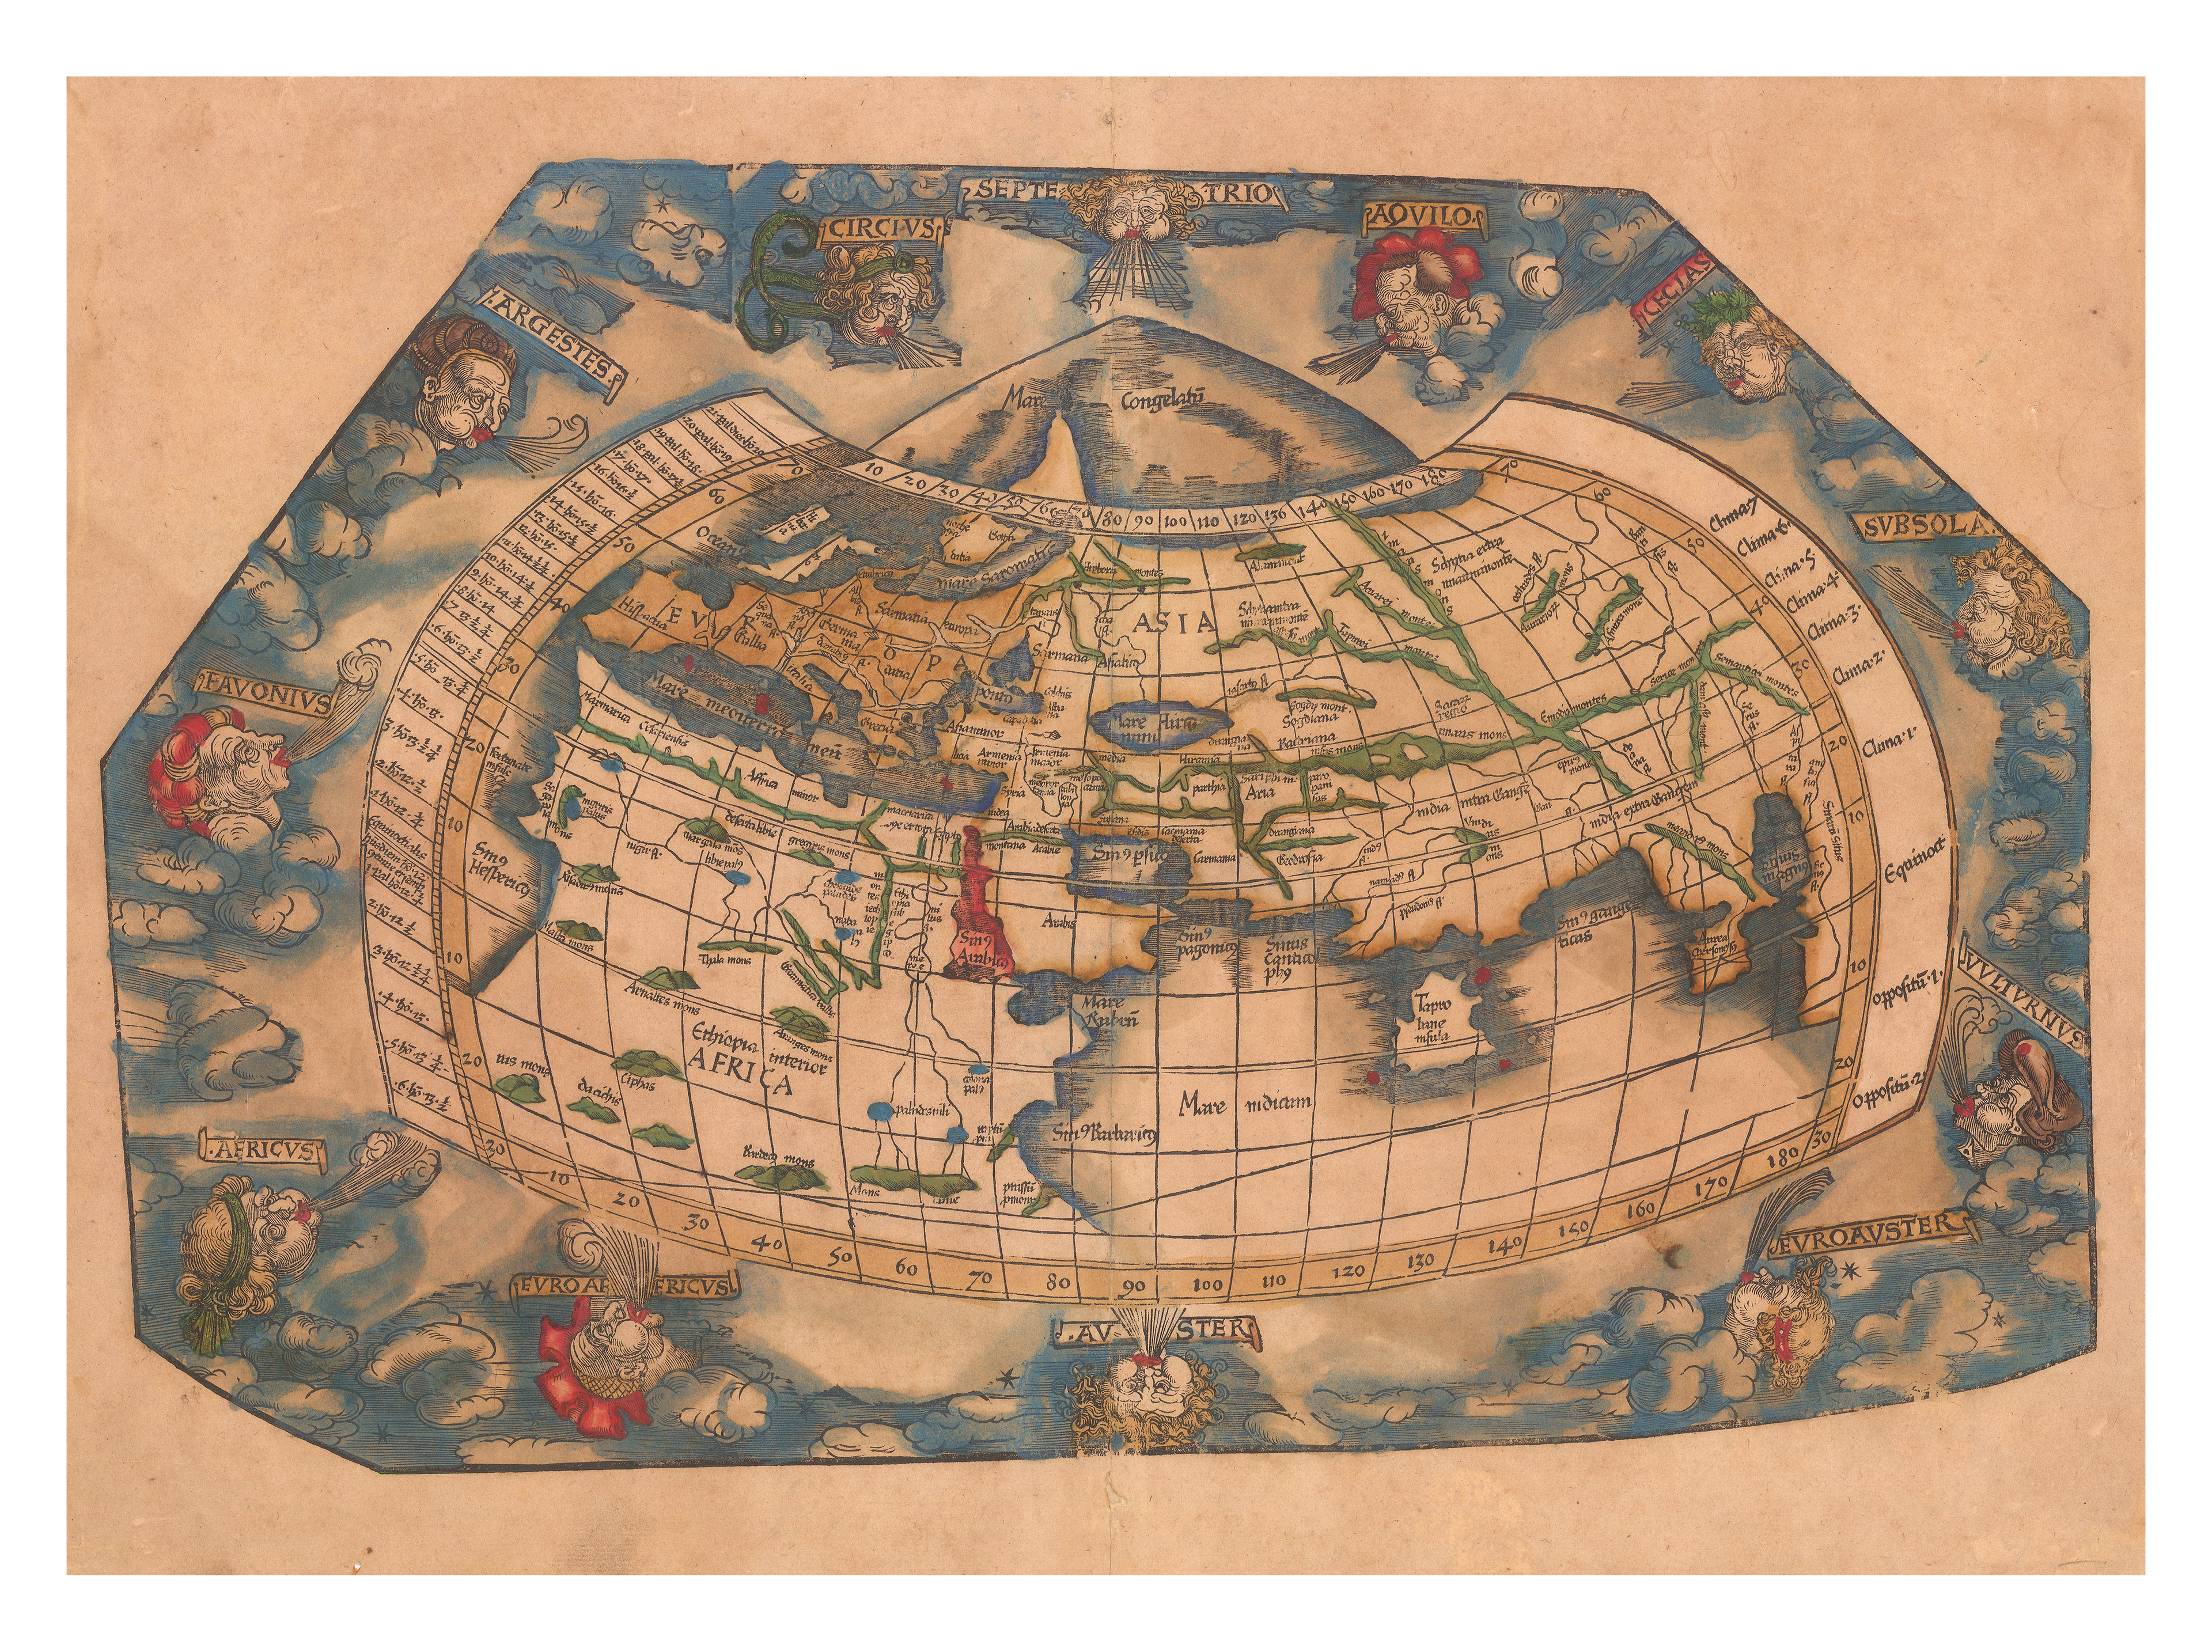 Ptolemaic Projection of a world map set against a blue sky, surrounded by clouds and 12 Windheads